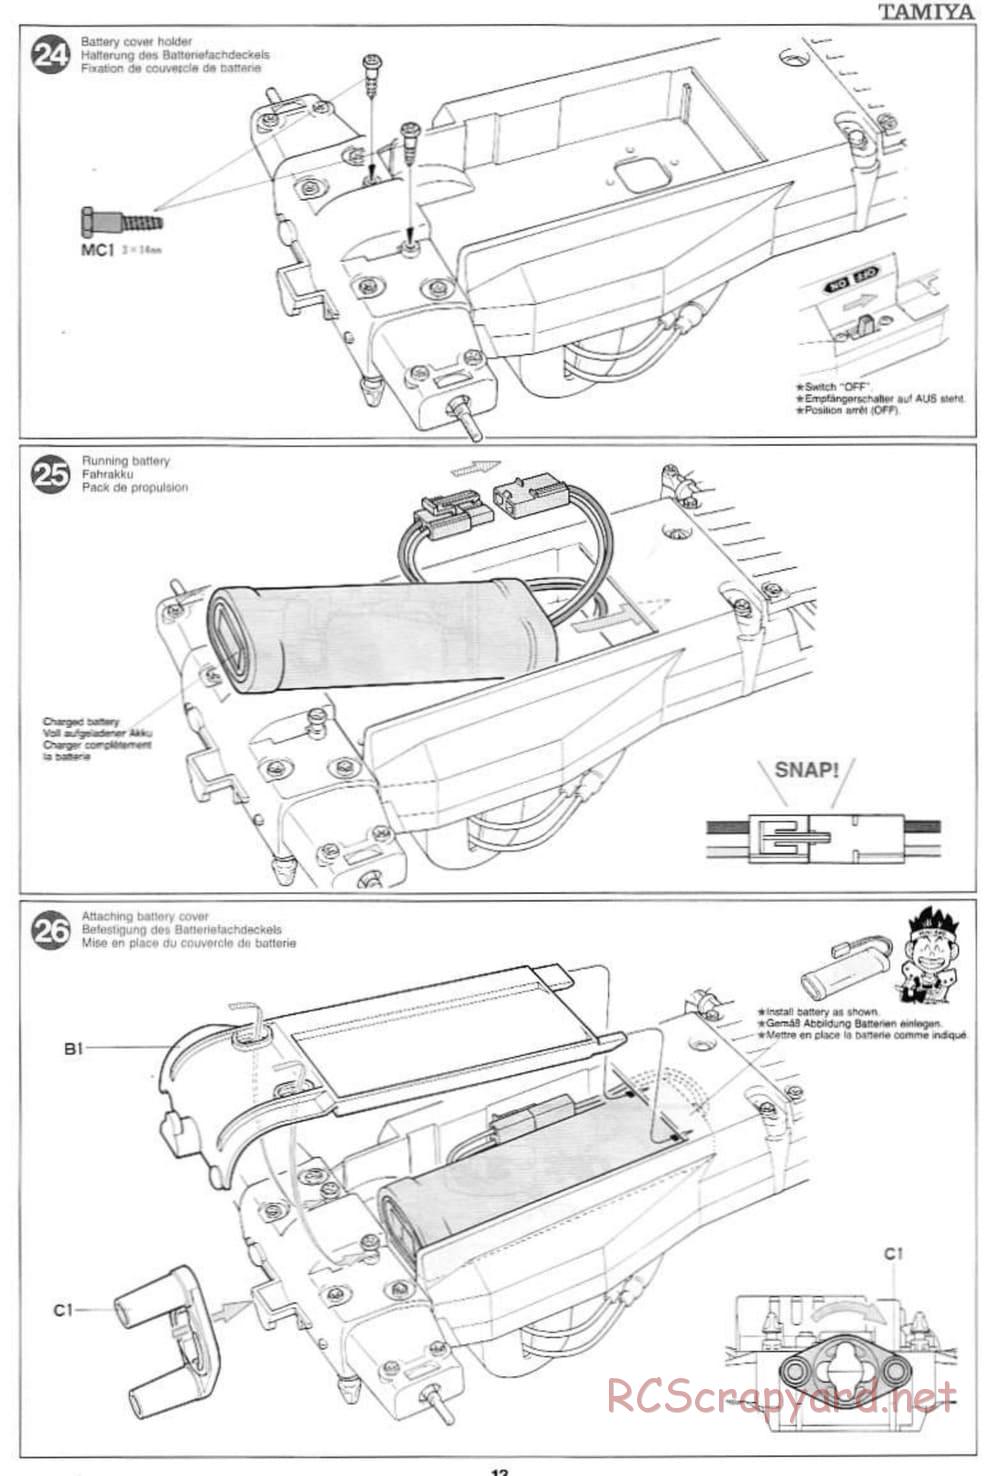 Tamiya - Voltec Fighter - Boy's 4WD Chassis - Manual - Page 13